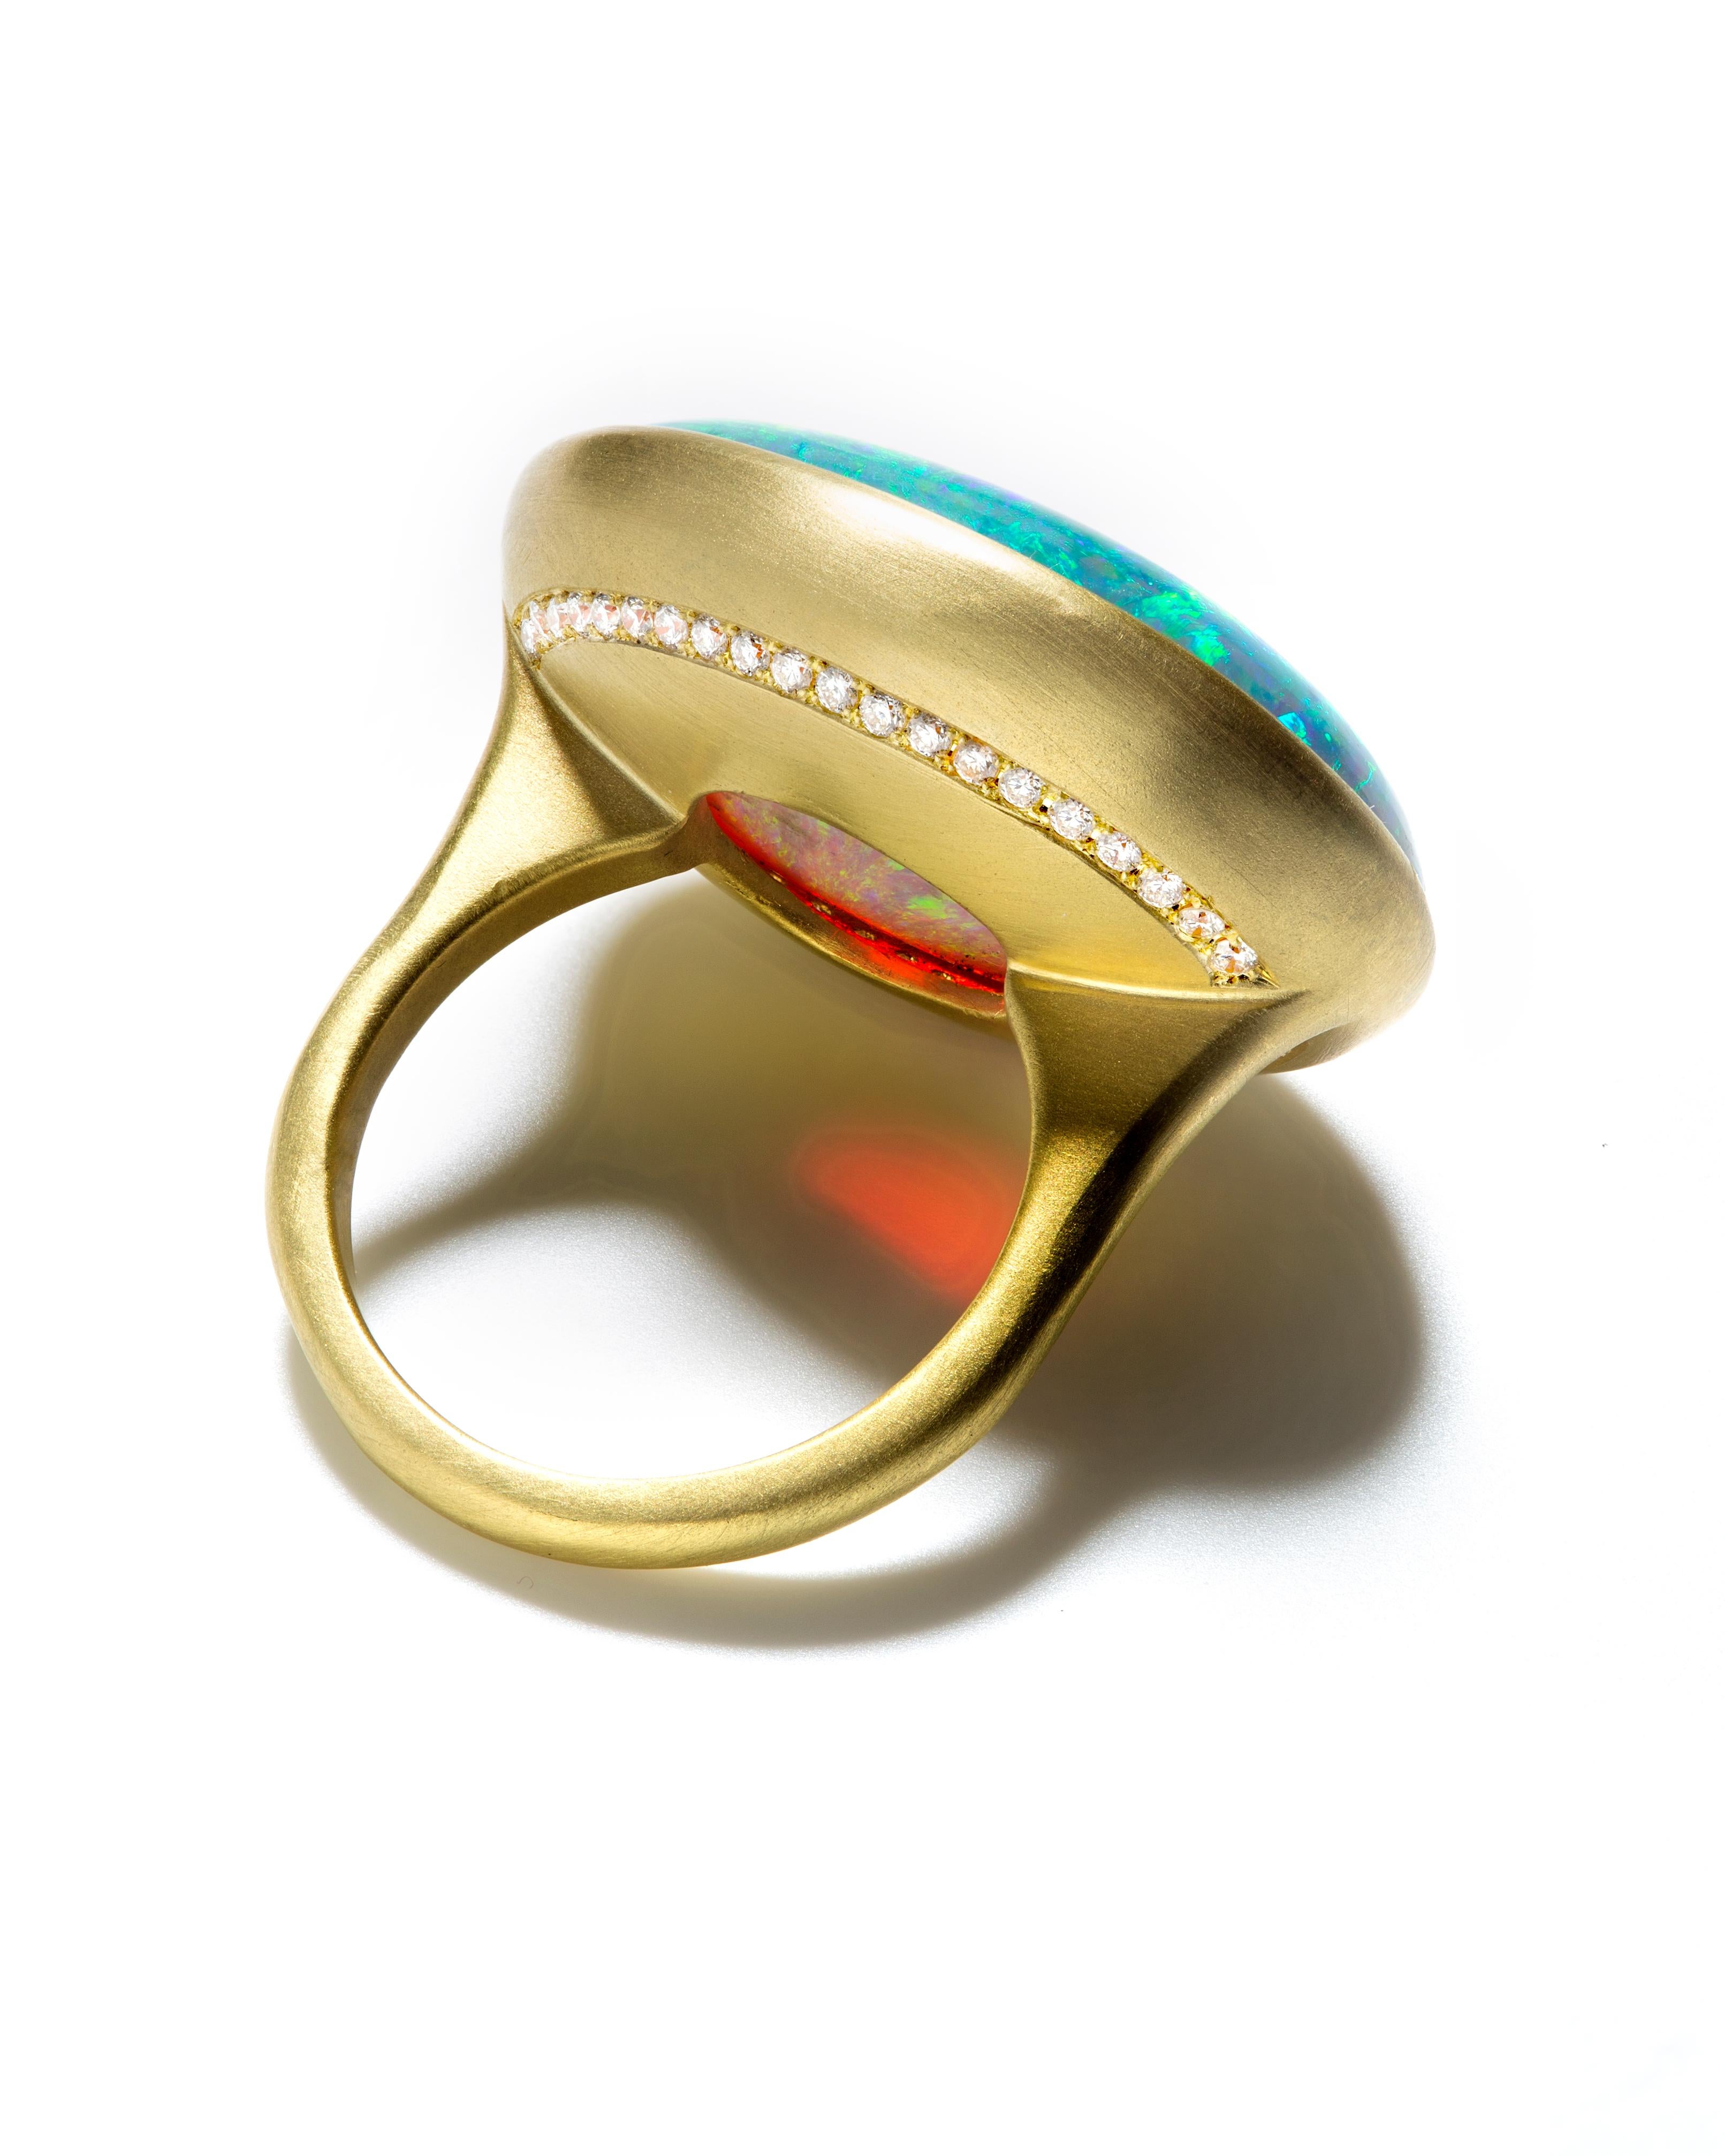 Stunning Australian Crystal Opal in 18k green gold setting.
Mined in the Corcoran Field Lightning Ridge in Southern Australia, this opal's striking color palette sets it apart from other gemstones. Handcrafted in 18k gold and accented with a